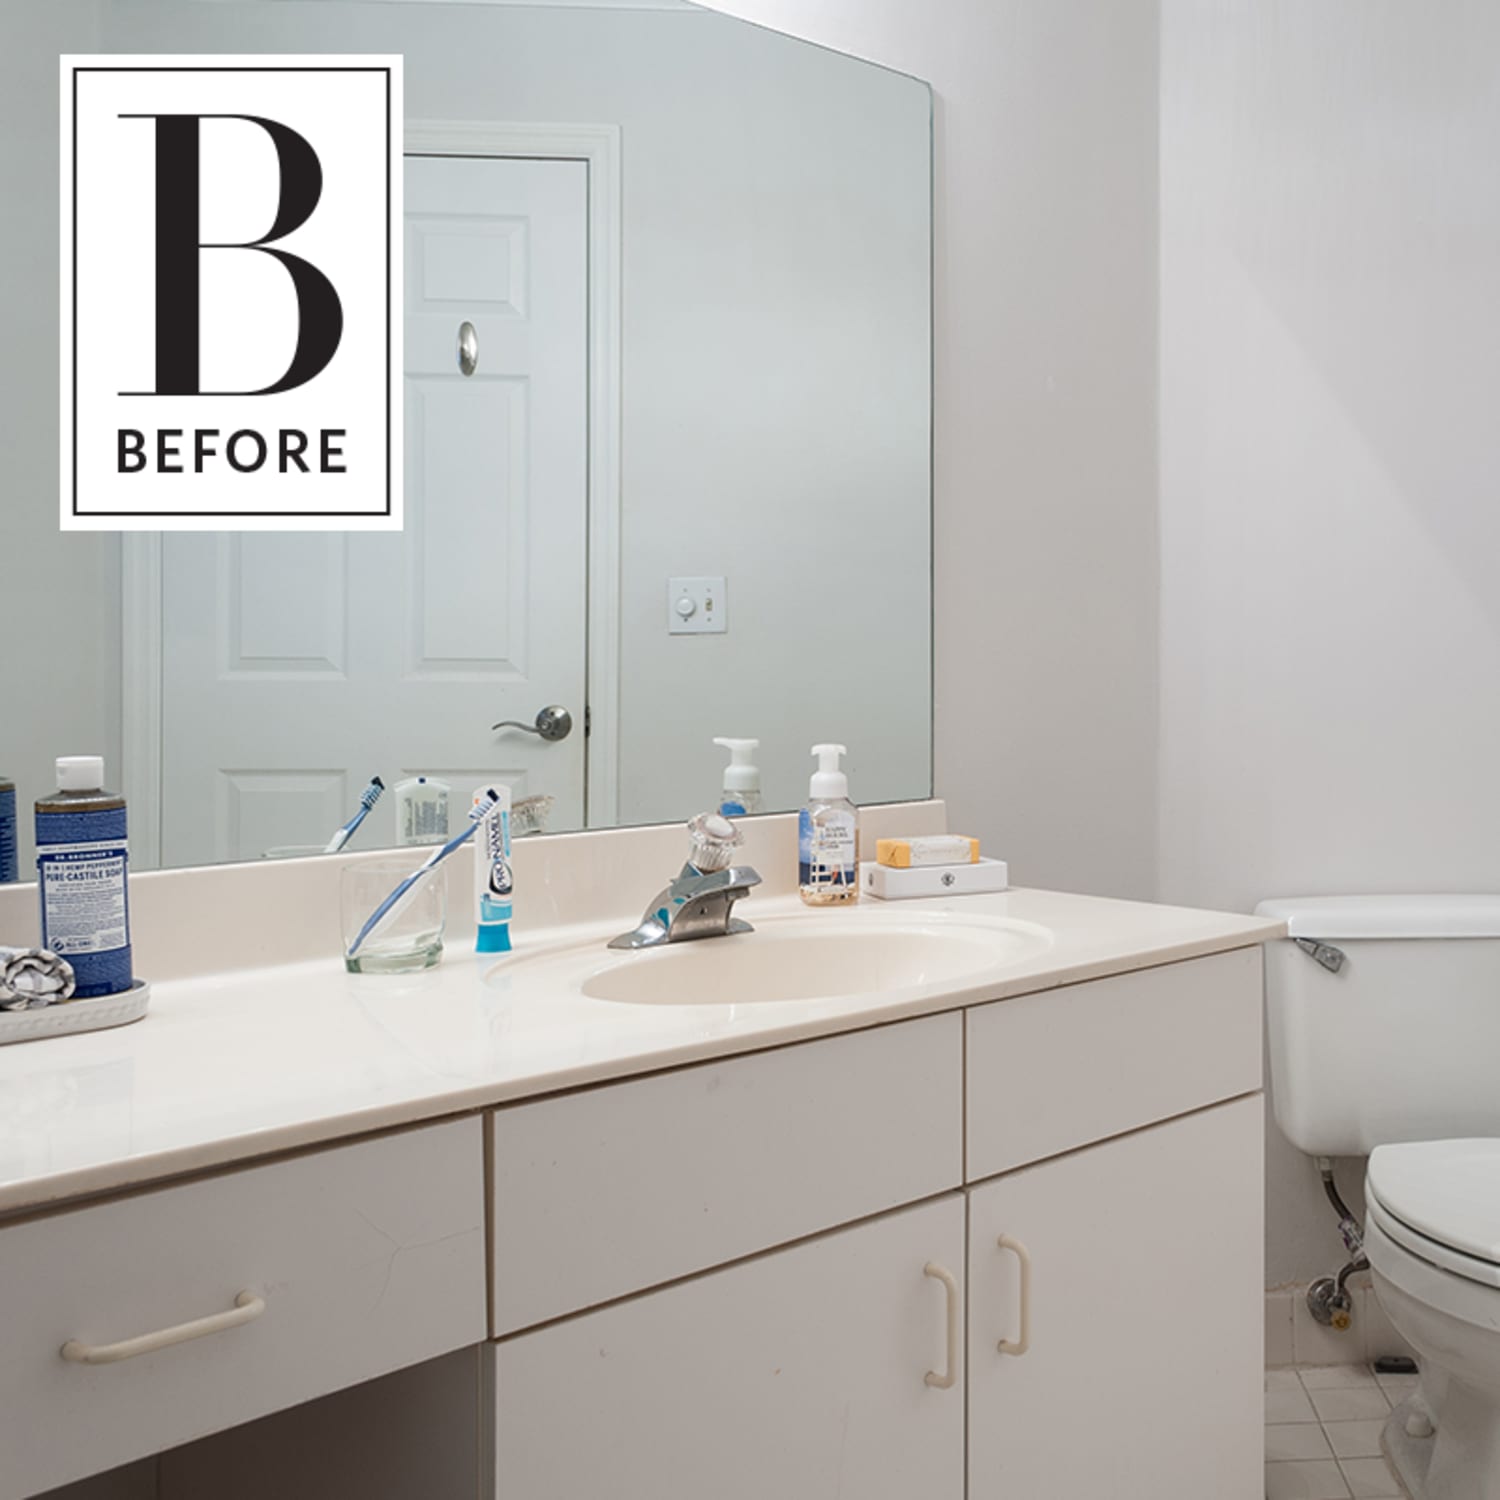 Say Goodbye to Boring Bathrooms with These Creative Renovation Ideas